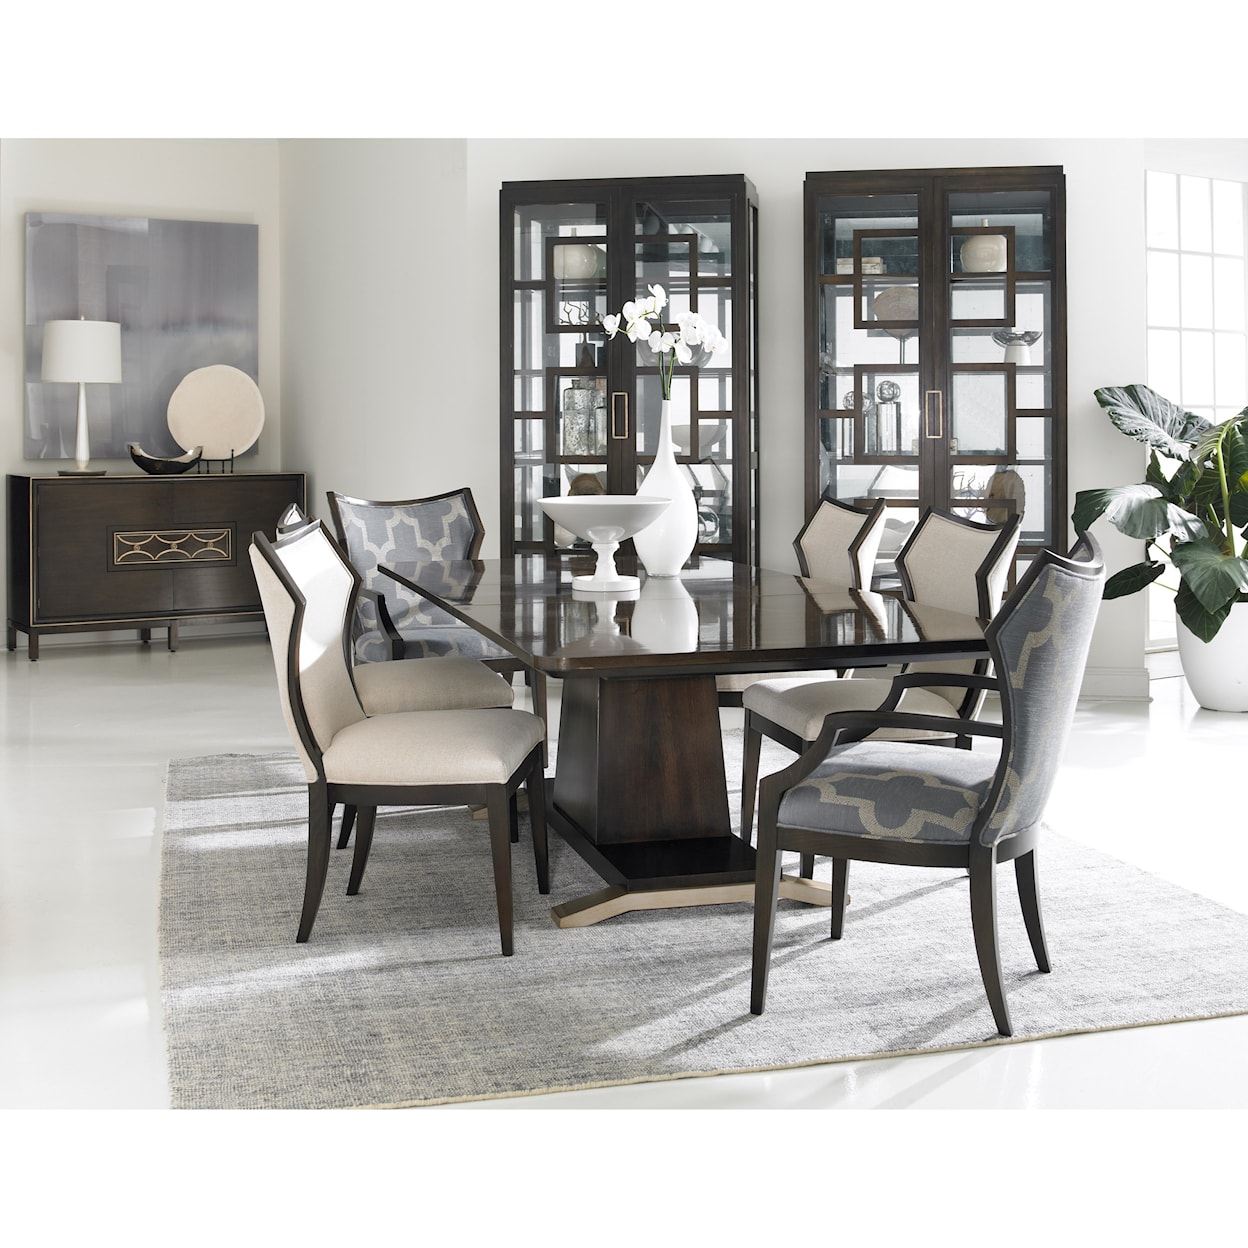 Hickory White Westport Collection Halsey Side Chair